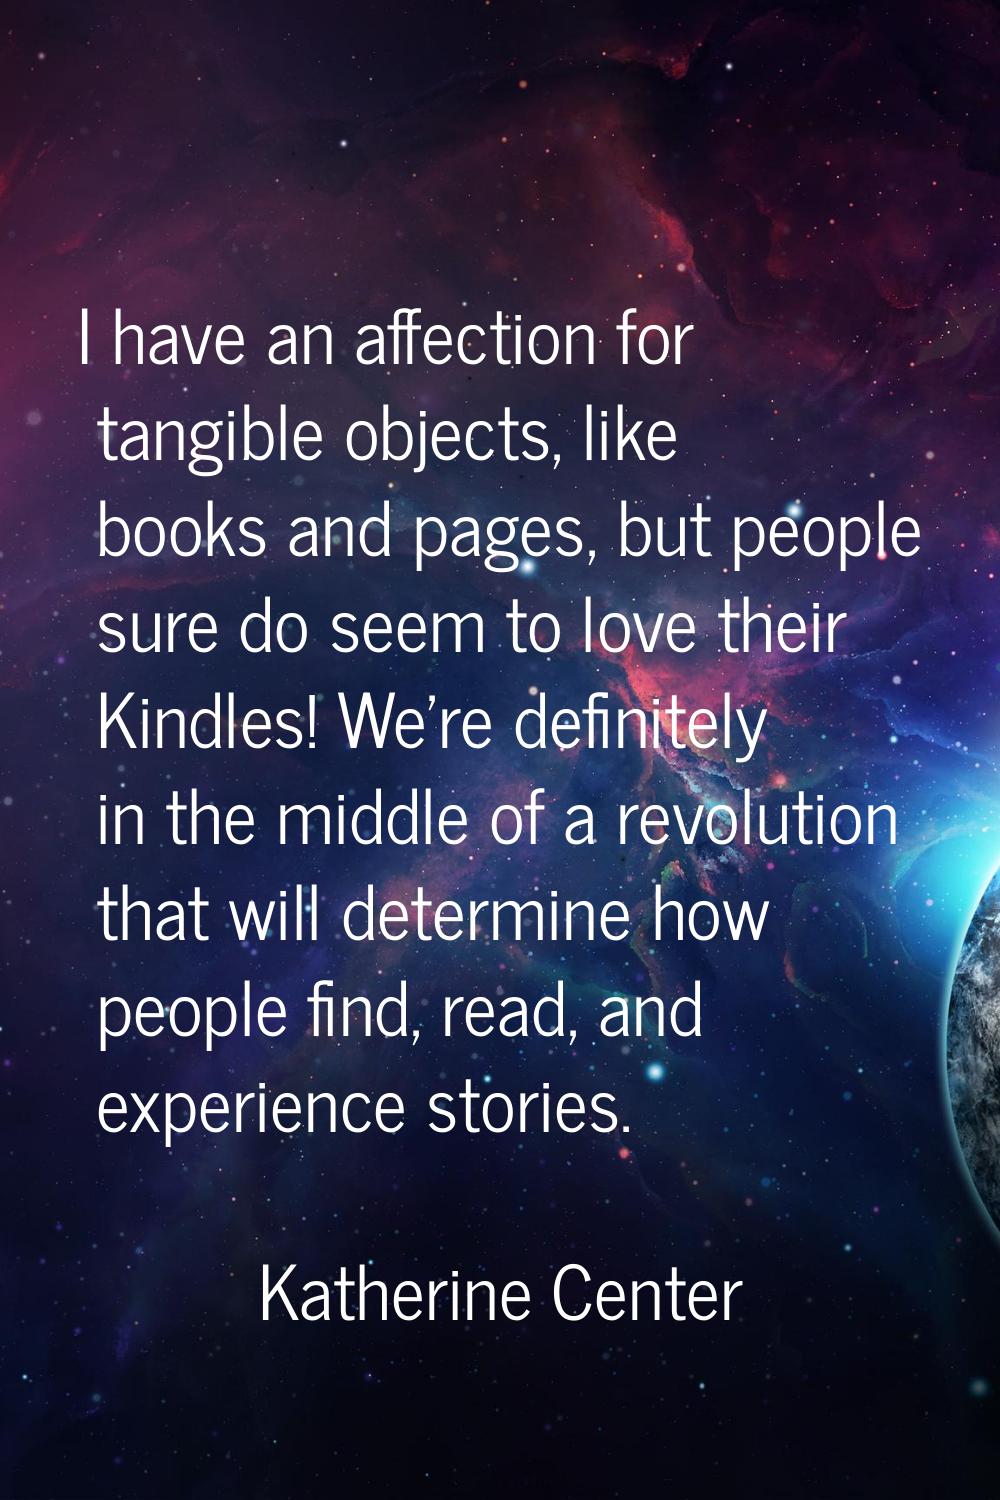 I have an affection for tangible objects, like books and pages, but people sure do seem to love the